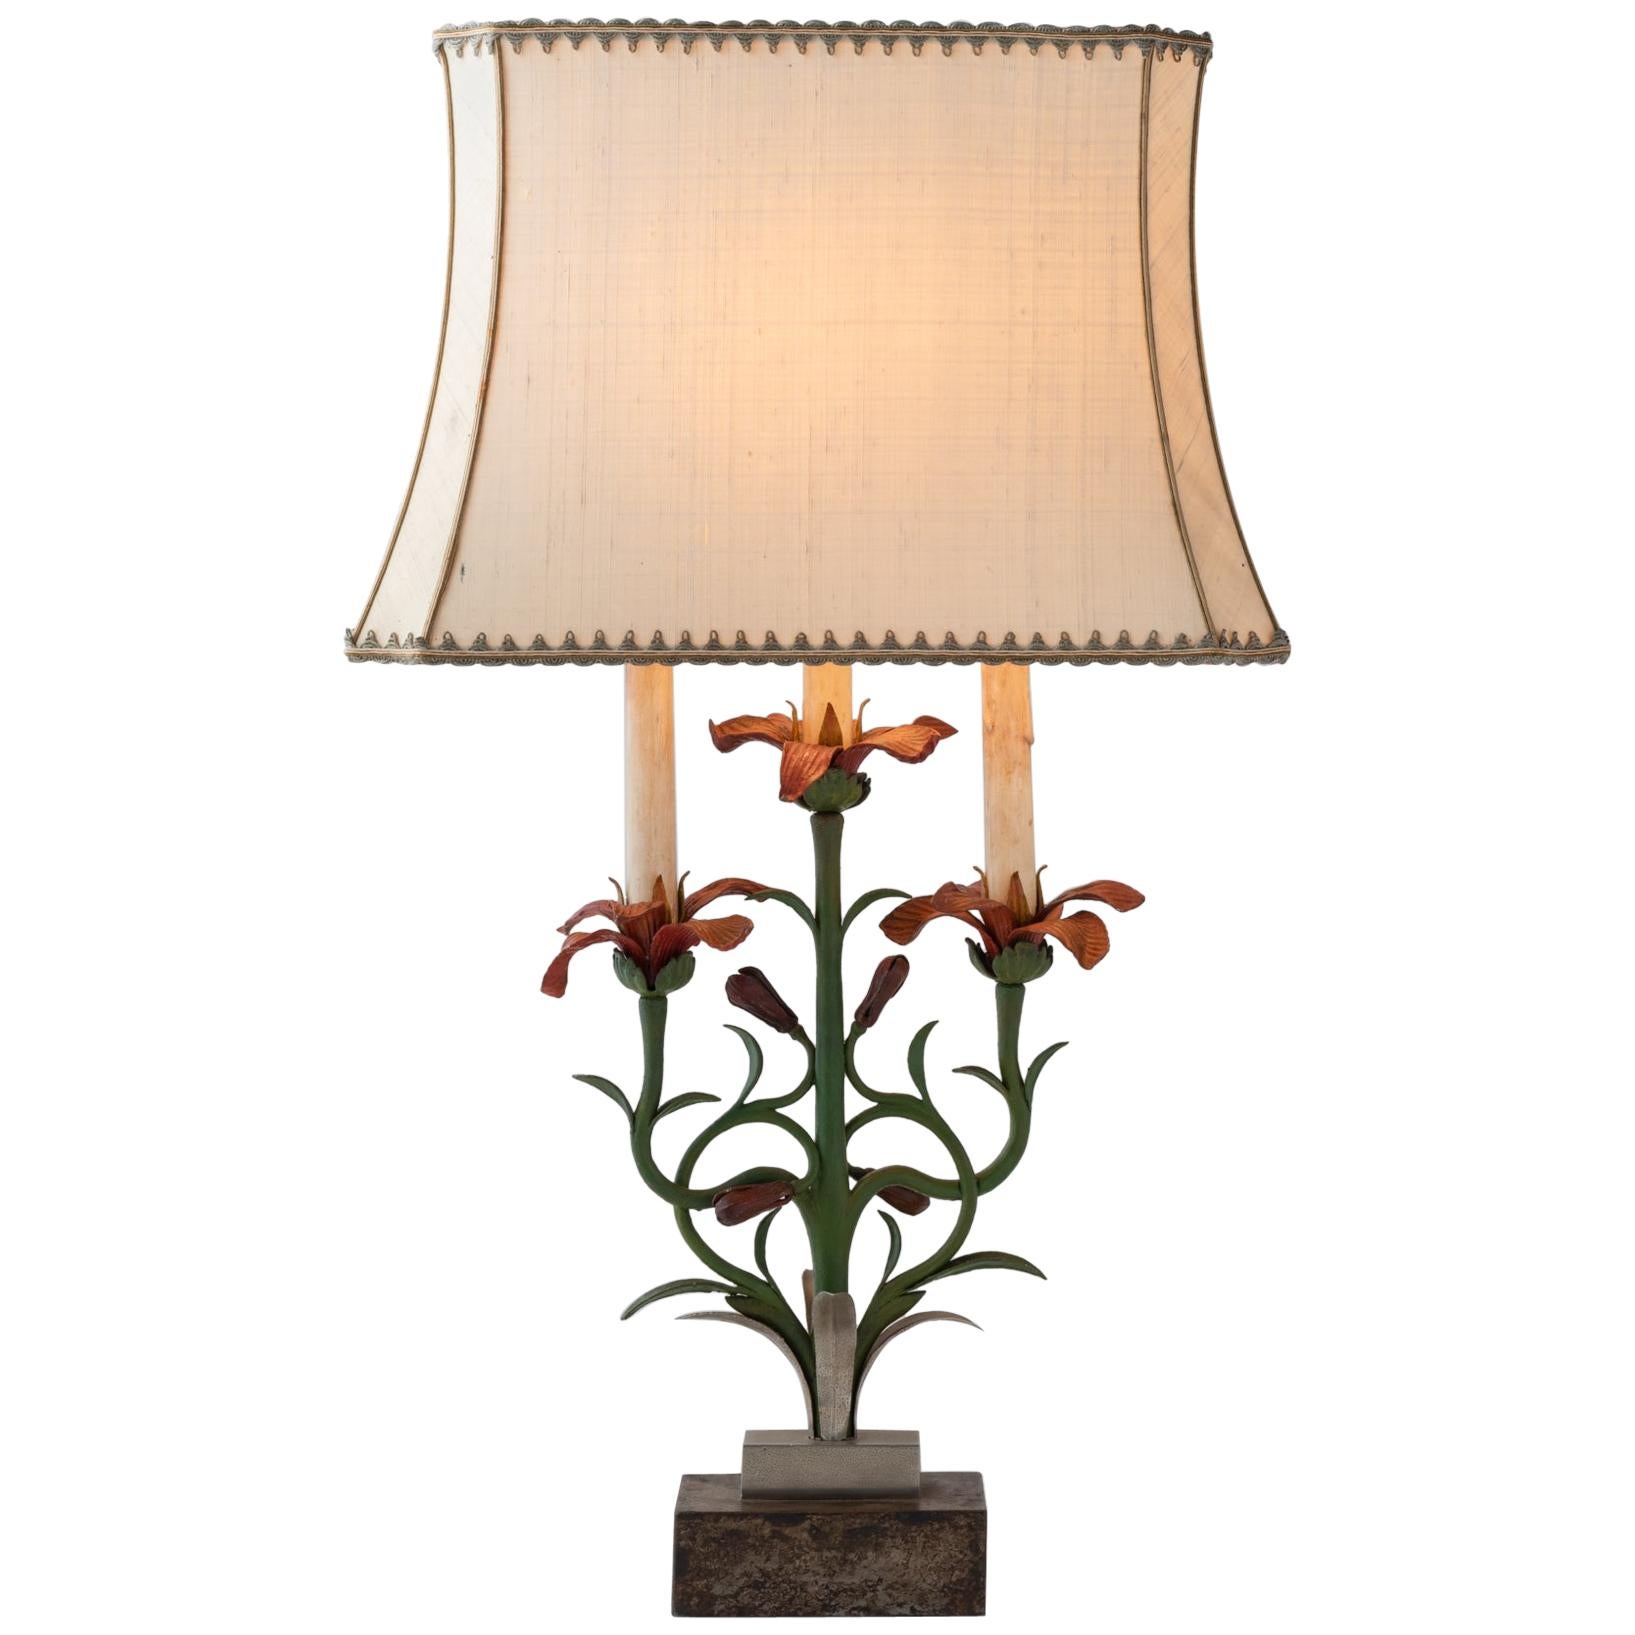 Painted Floral Cast Iron Table Lamp, Italy, circa 1900